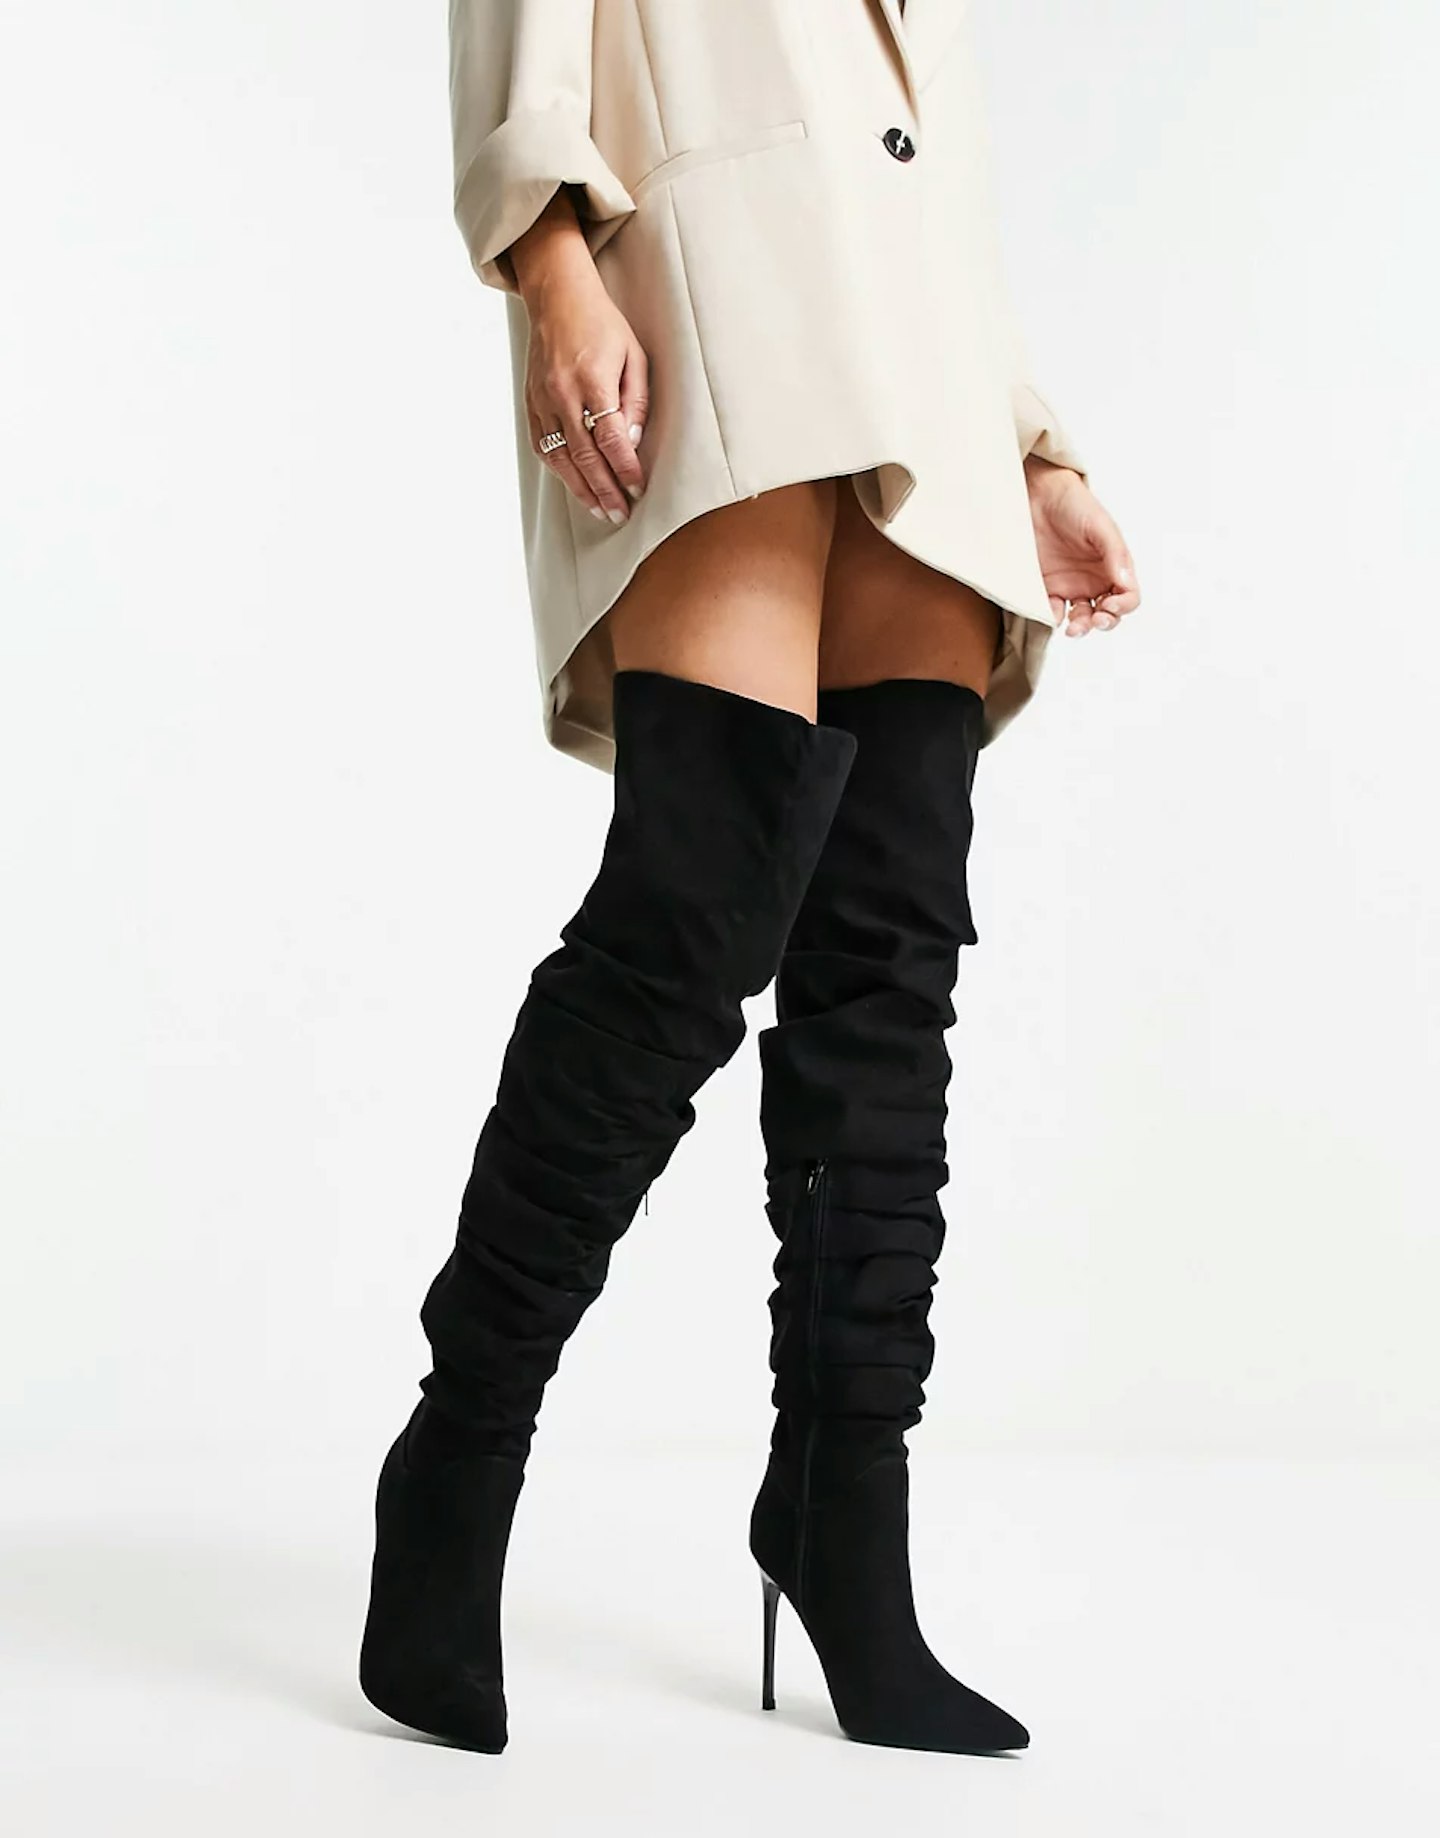 ASOS DESIGN, Kingdom Heeled Ruched Over The Knee Boots